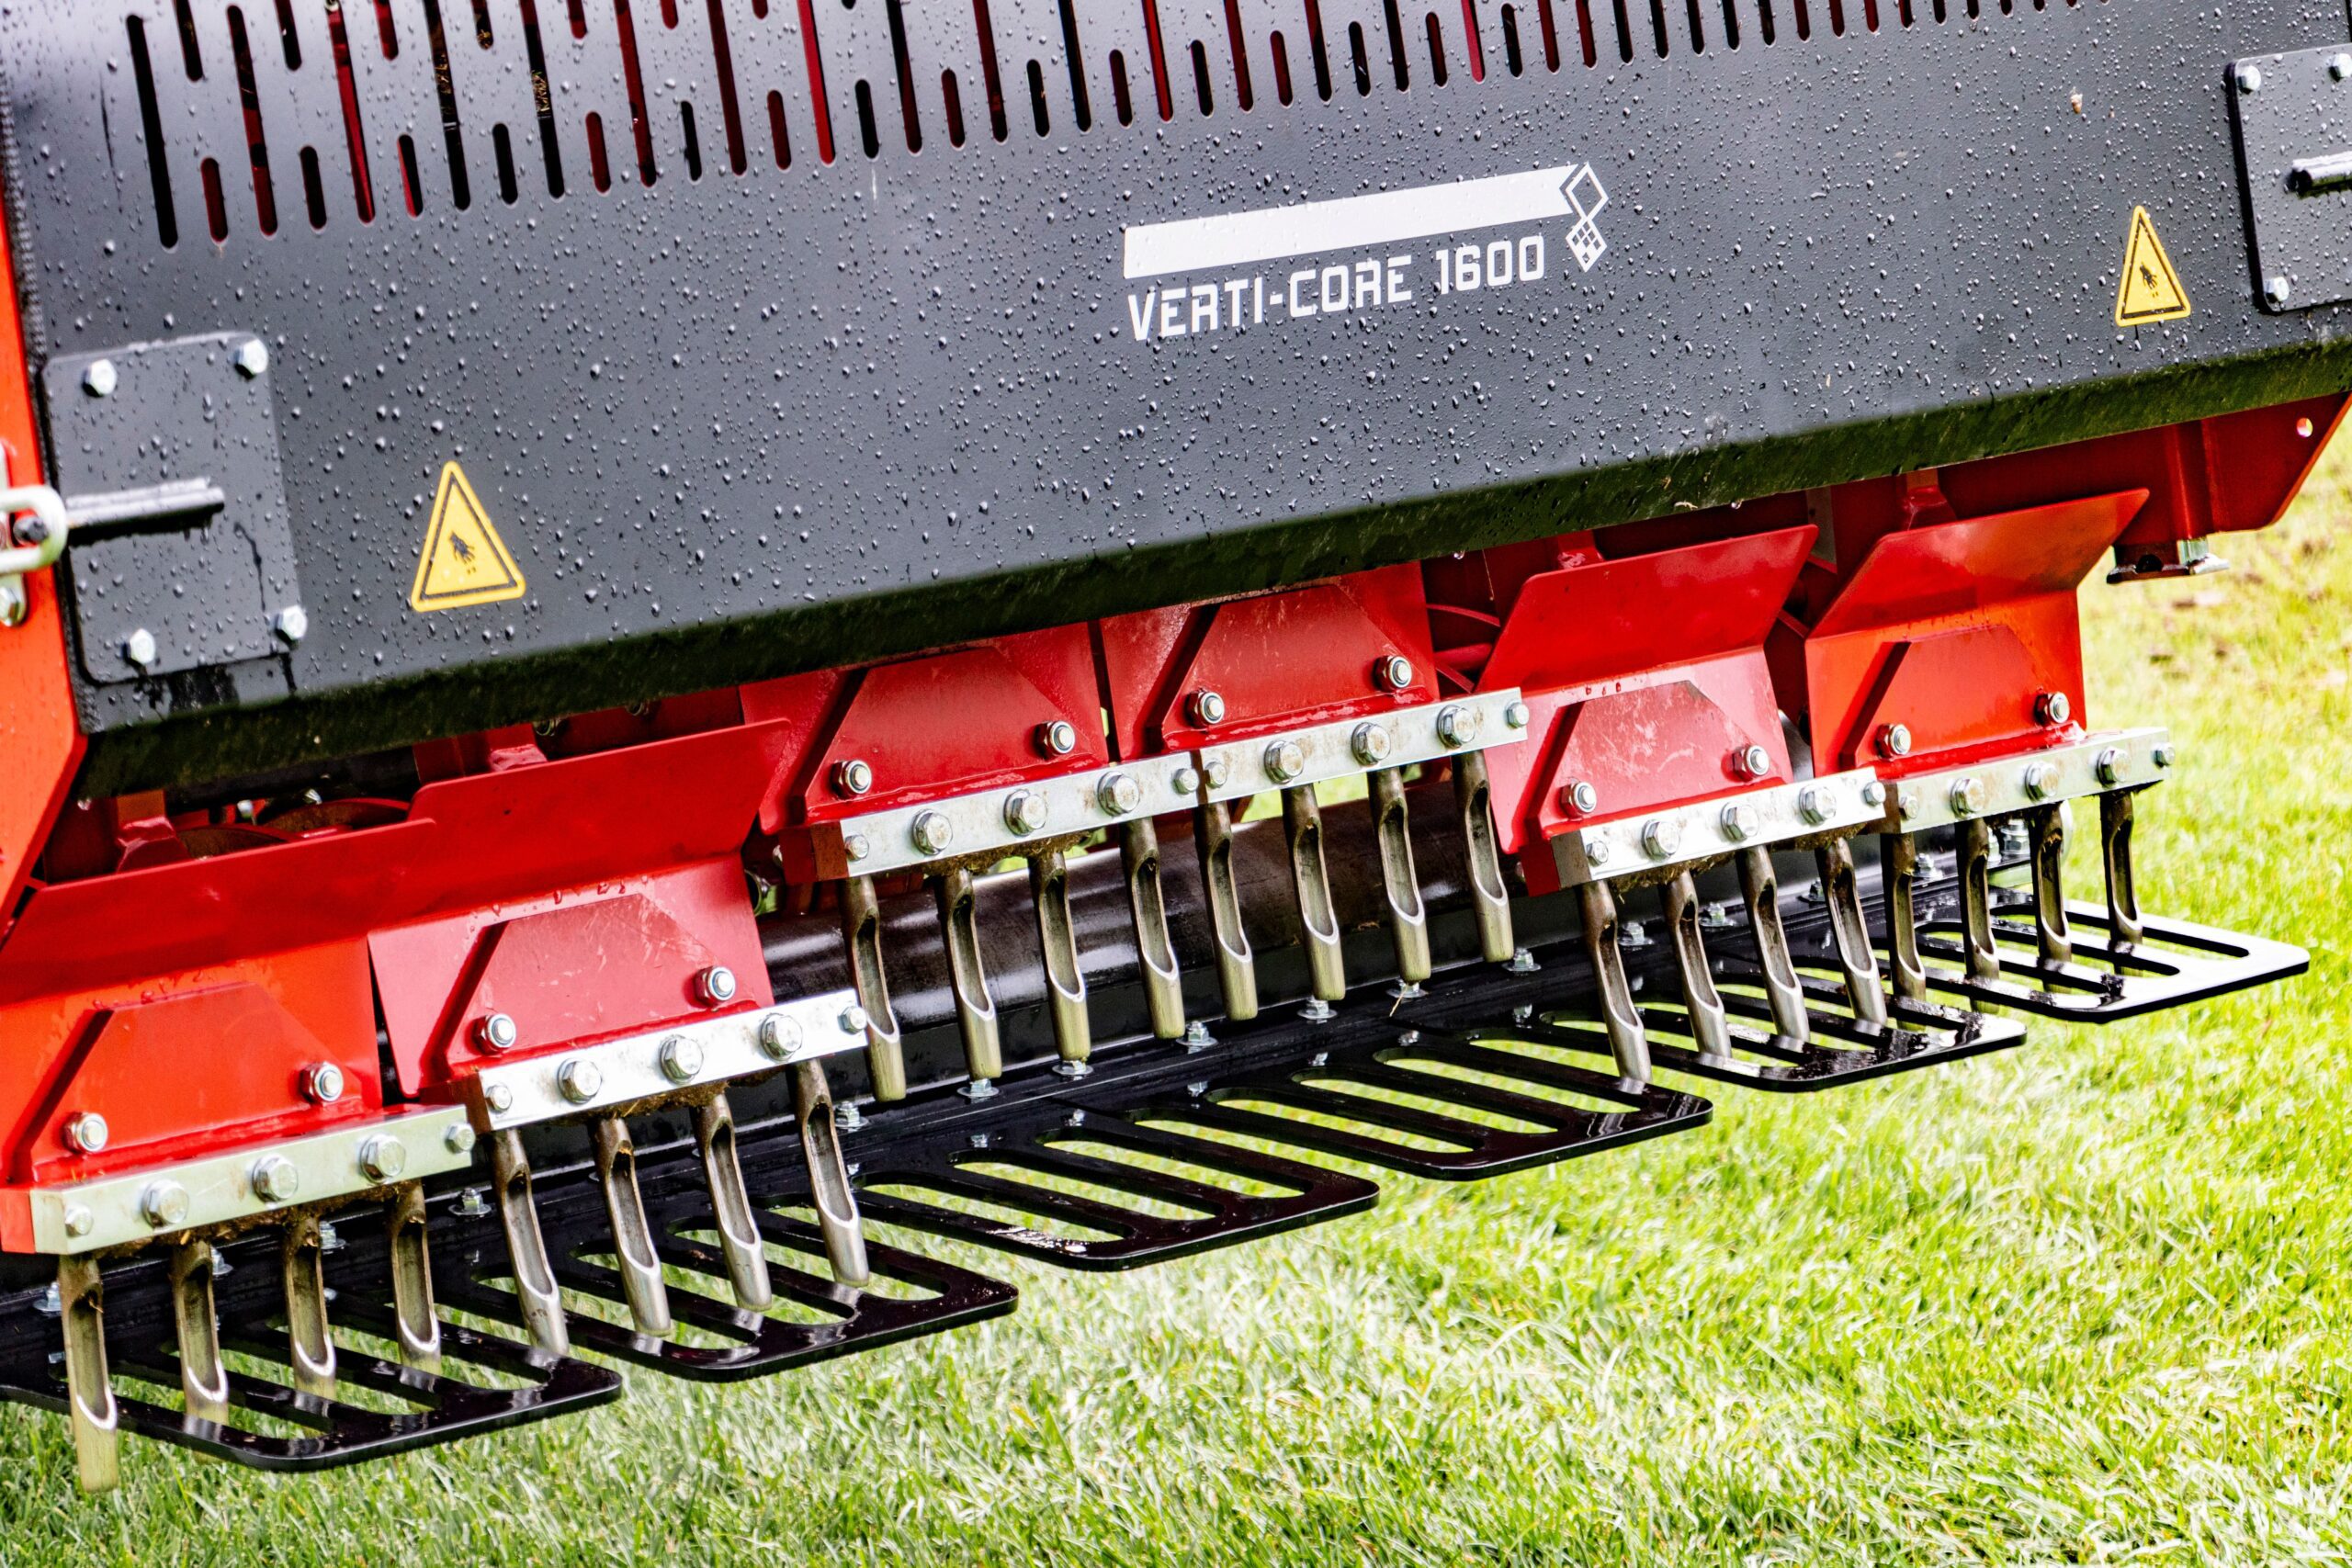 Aeration Tines in a Verti-Core